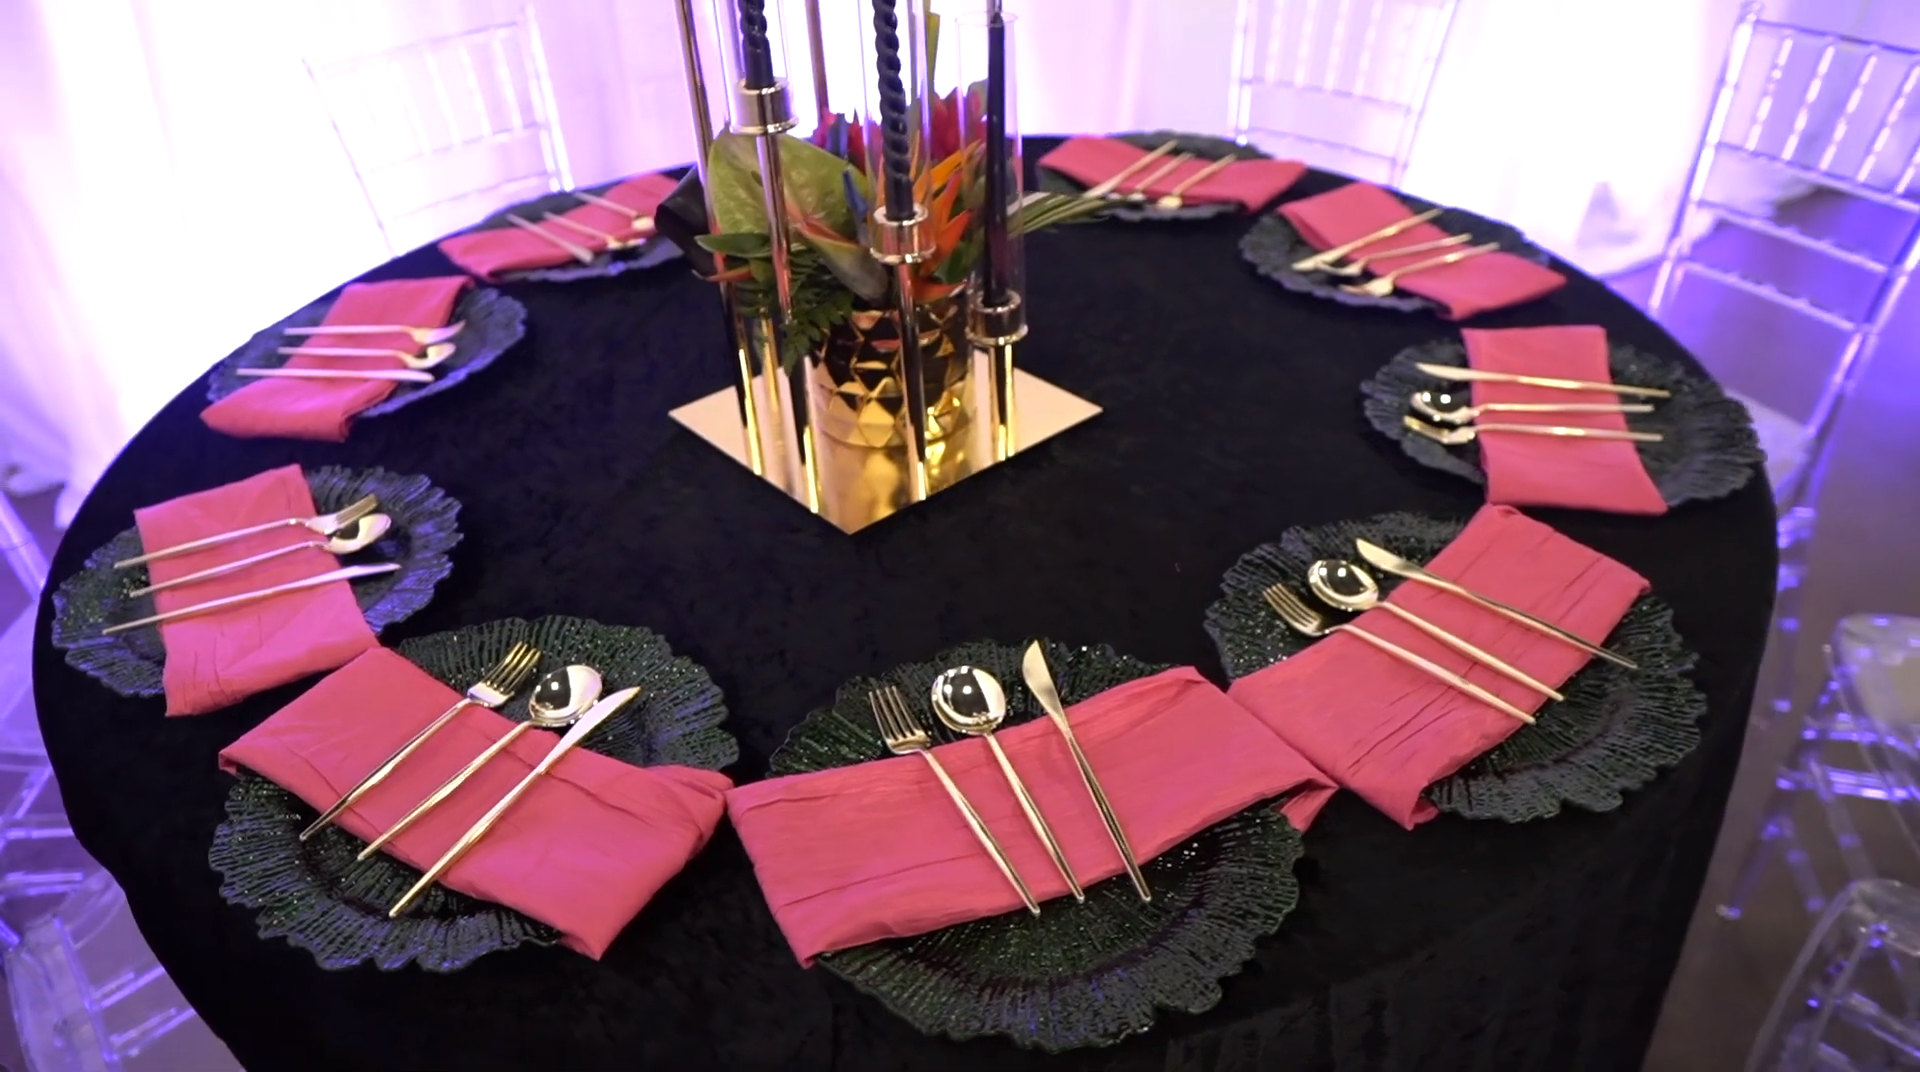 Table setting with charger plates, utensils, and dinner napkins